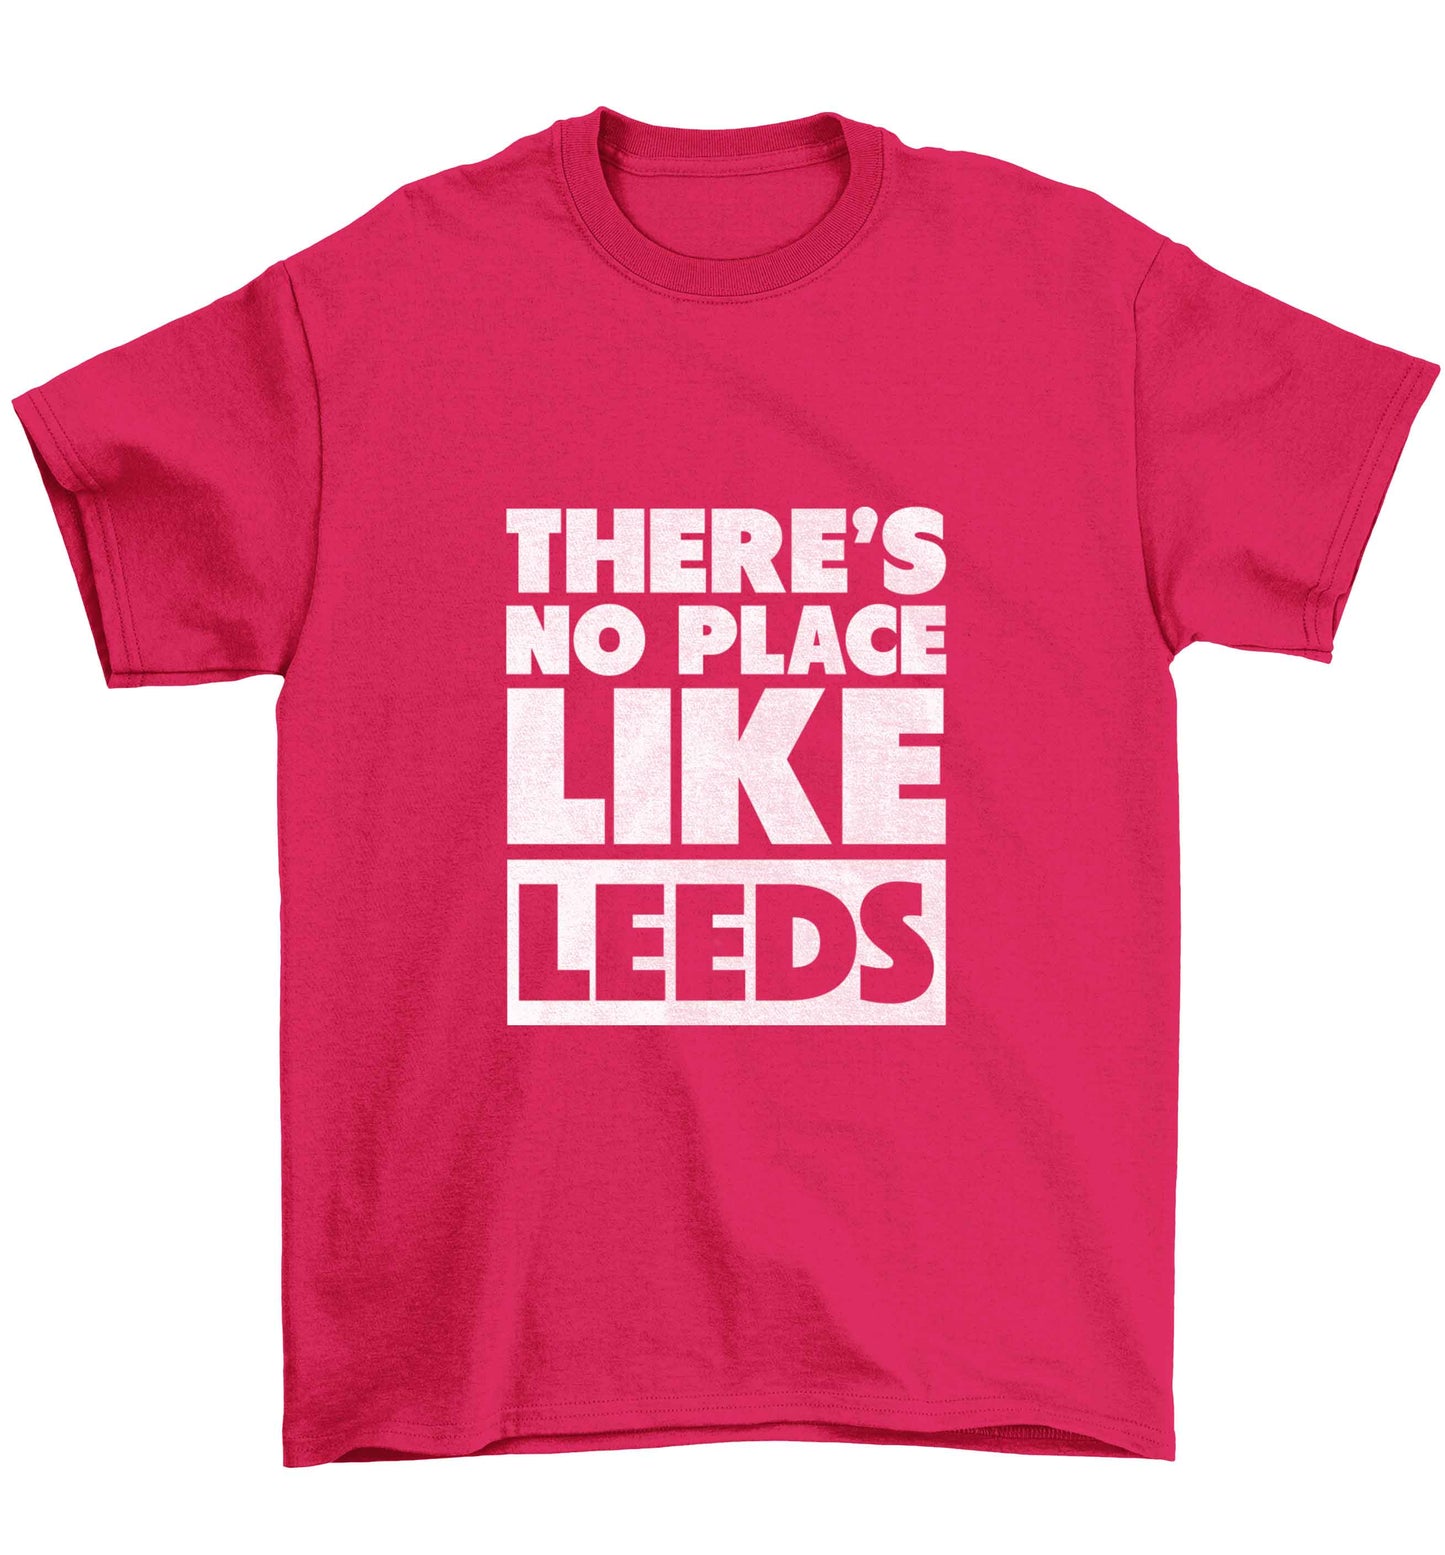 There's no place like Leeds Children's pink Tshirt 12-13 Years